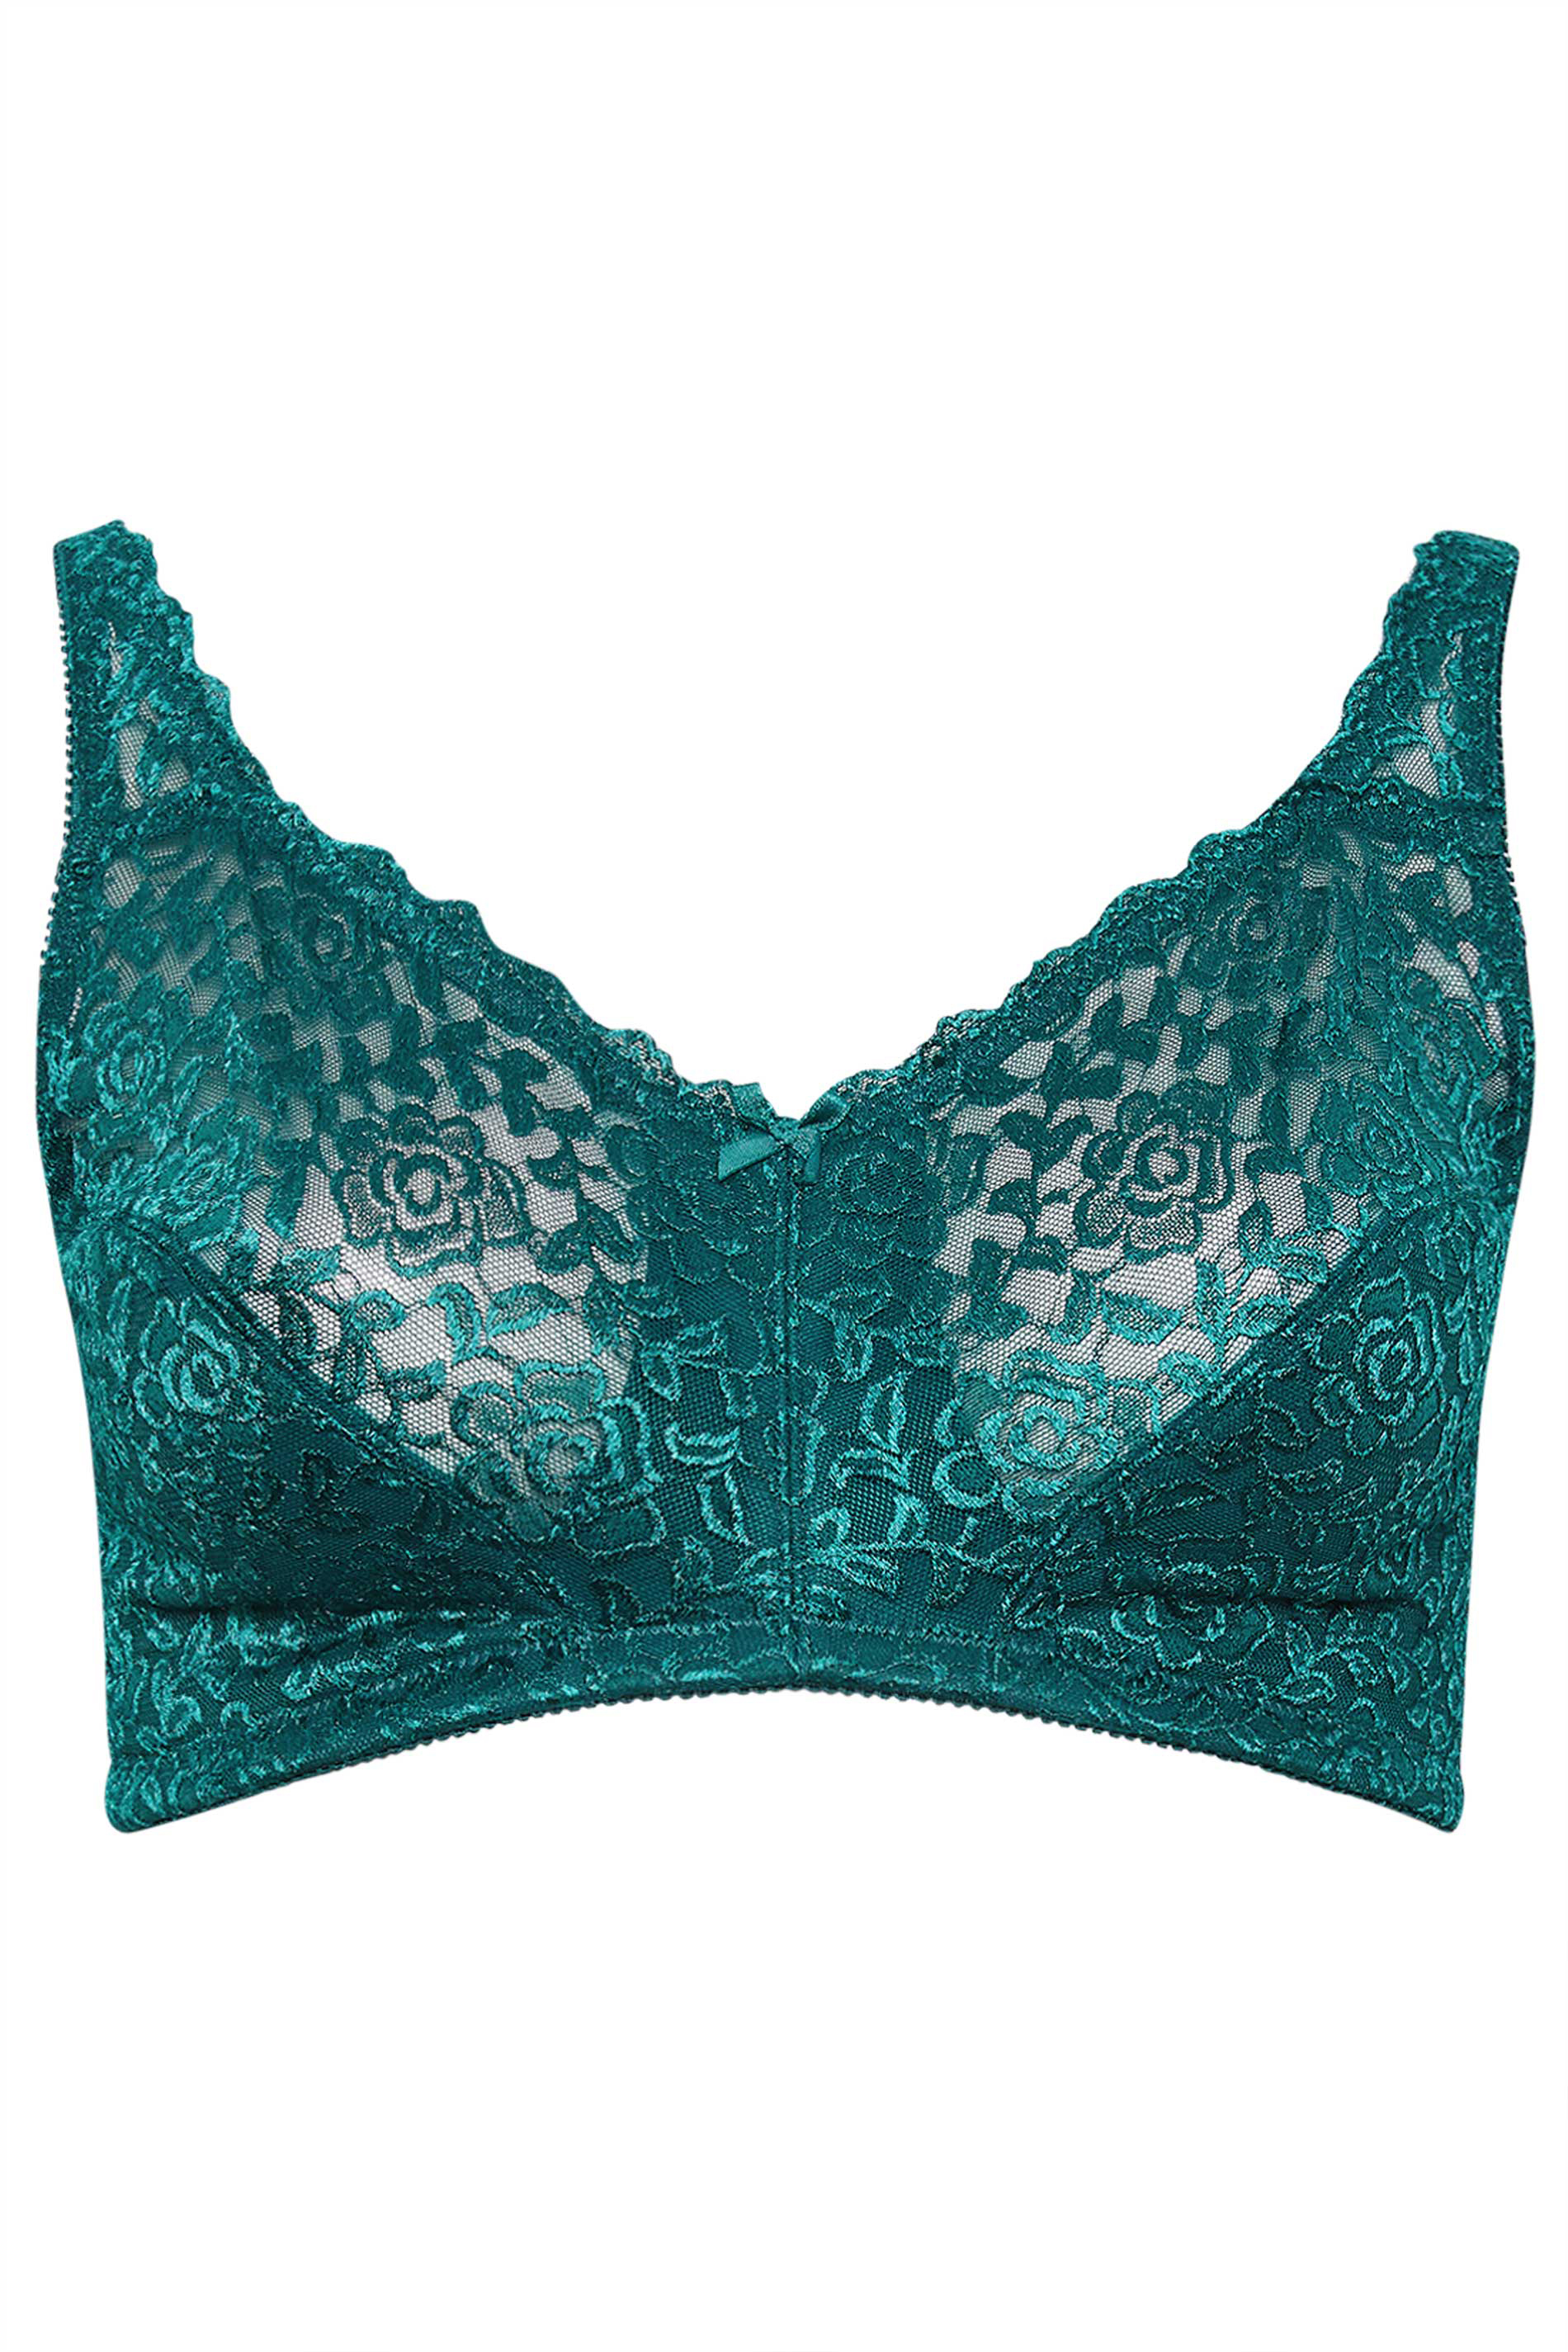 Buy Green Recycled Lace Full Cup Non Padded Bra 34B, Bras